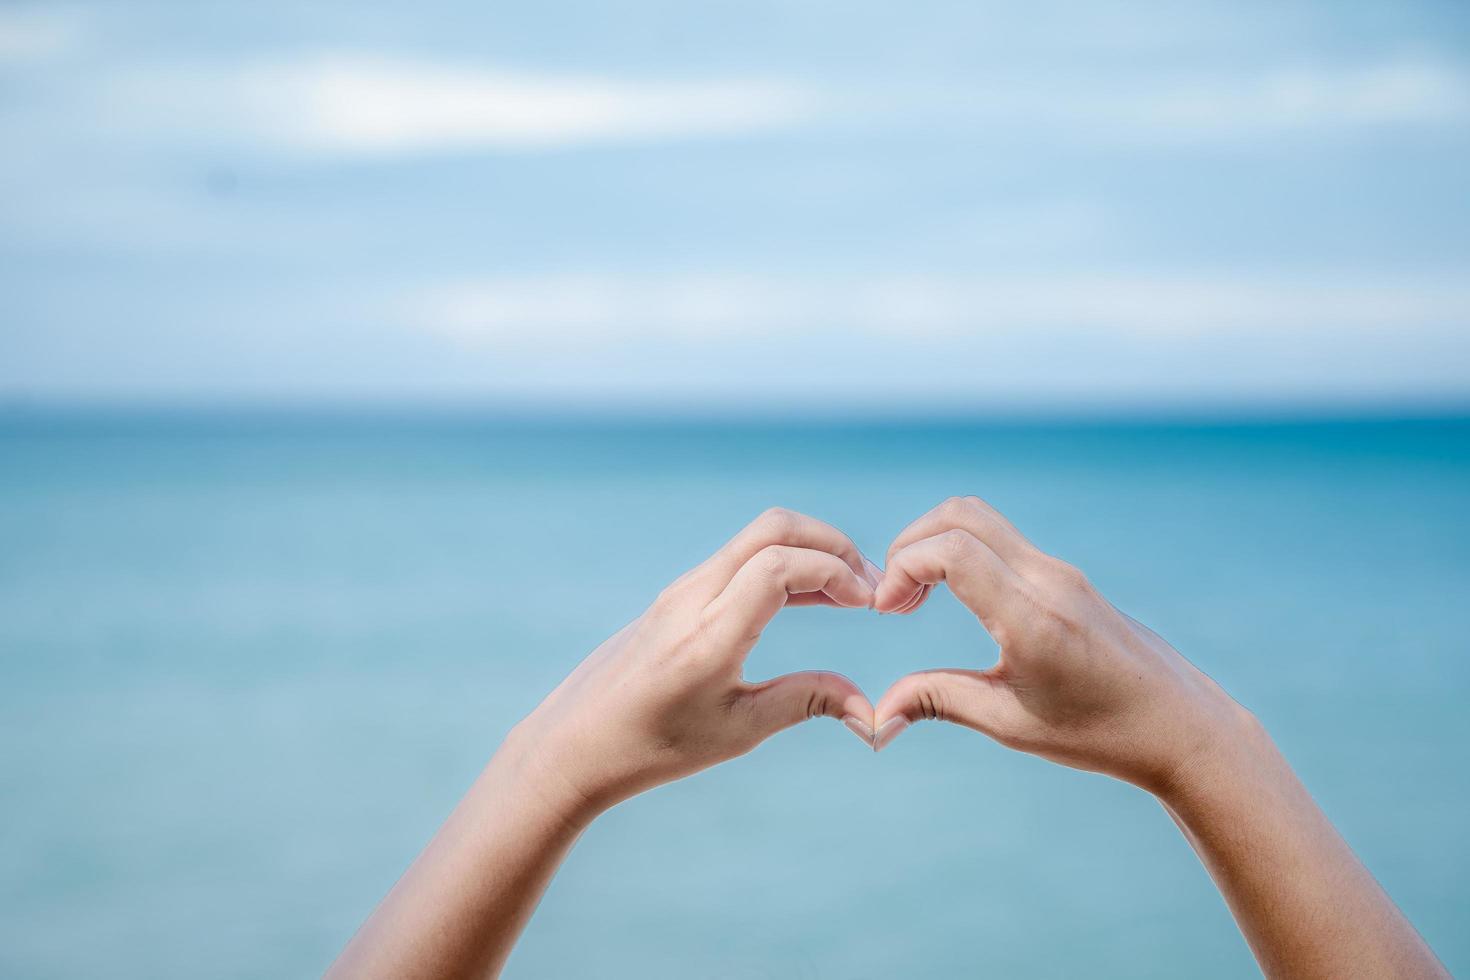 Female hand in the shape of a heart against the sky, sea background, hands in the shape of a love heart. photo